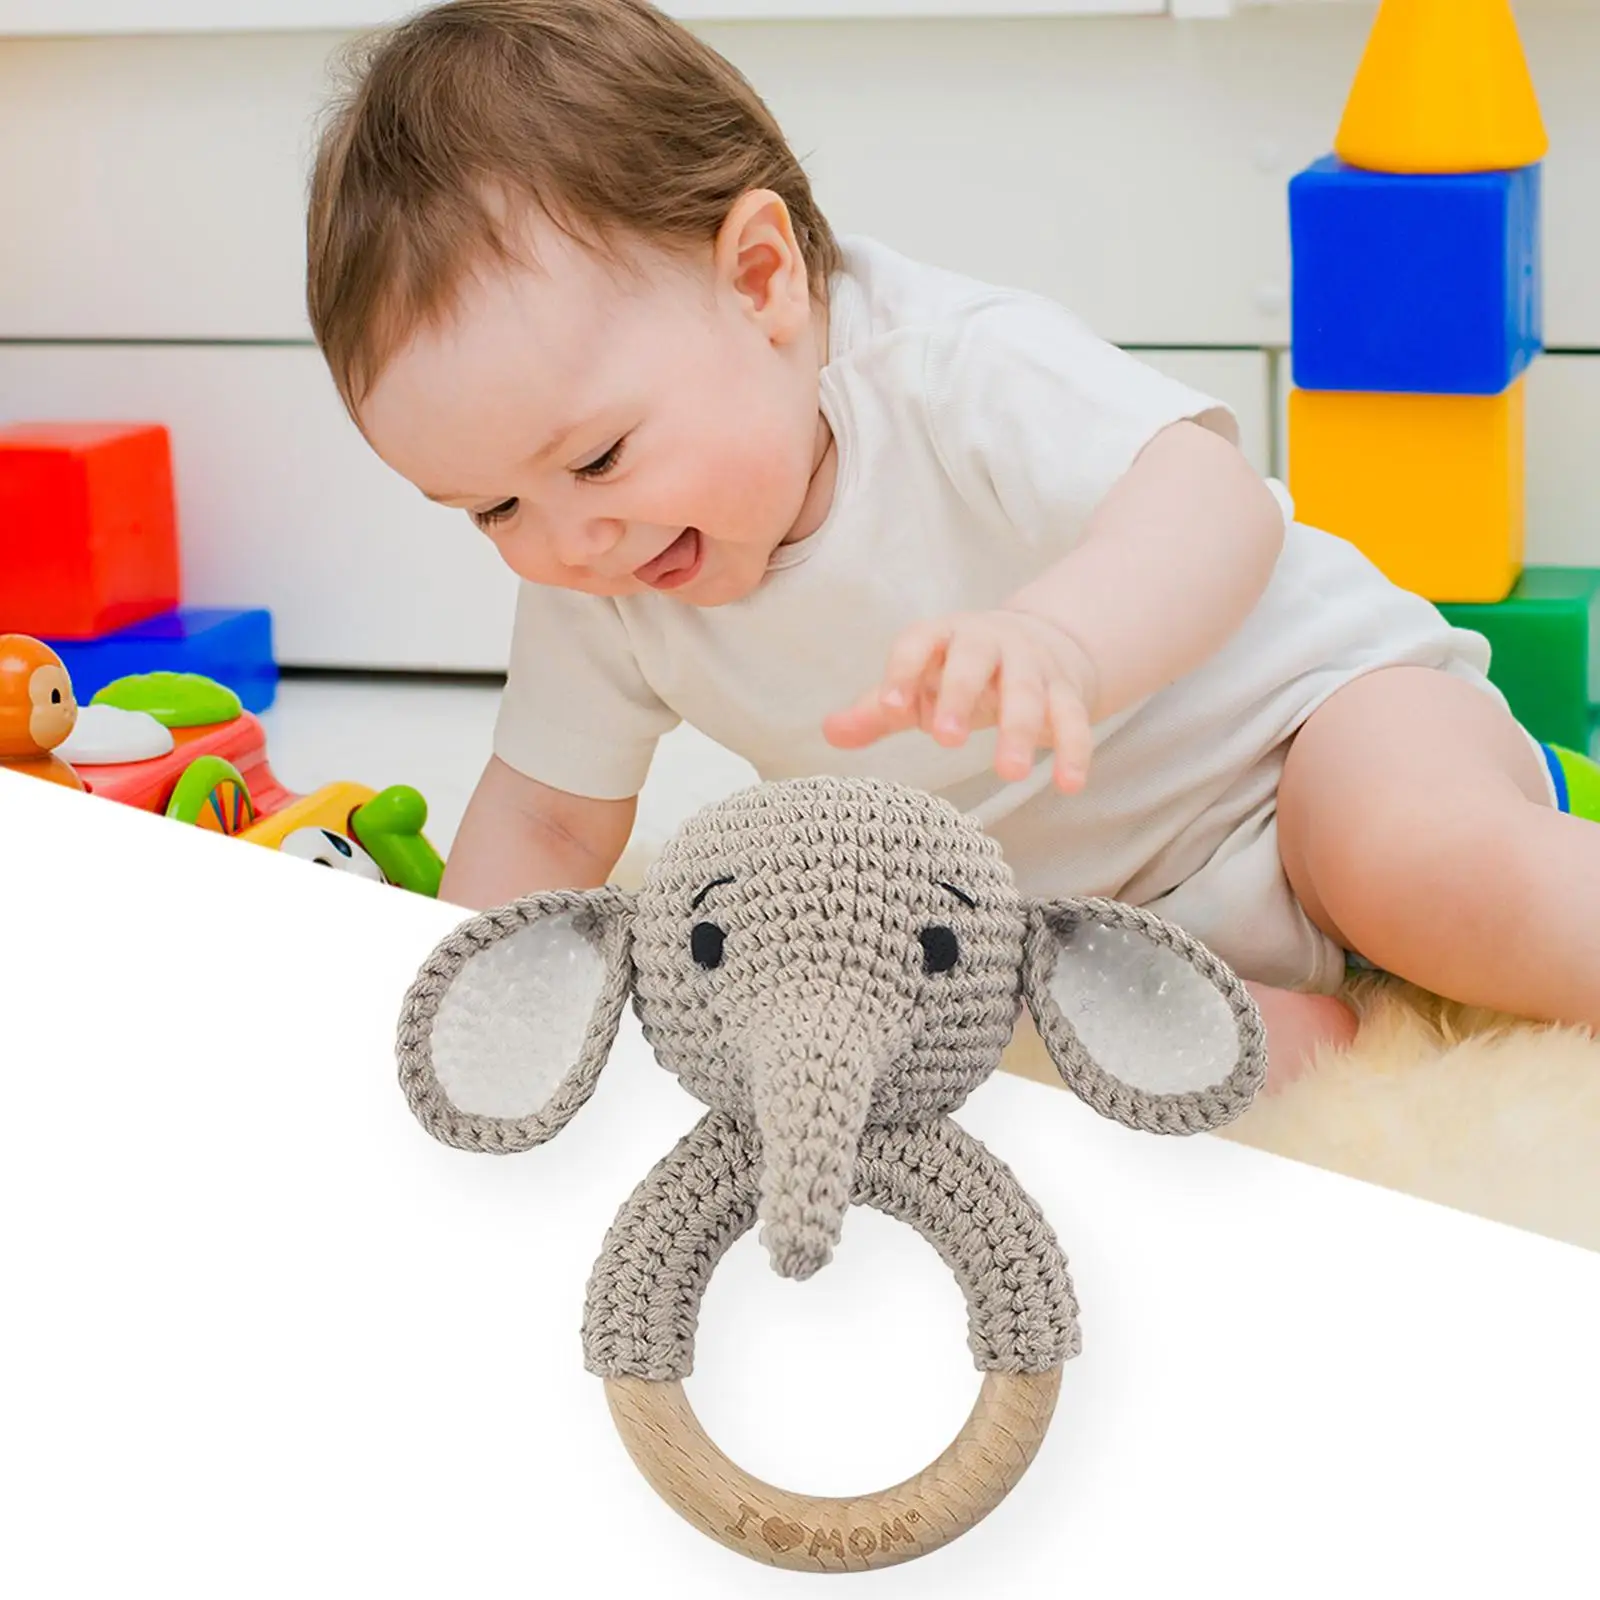 Toddlers Wooden Rattle Stroller Toys,Baby Grasping Toy Shower Gift,Fine Motor Learning,Crochet Baby Rattle, Baby Rattle